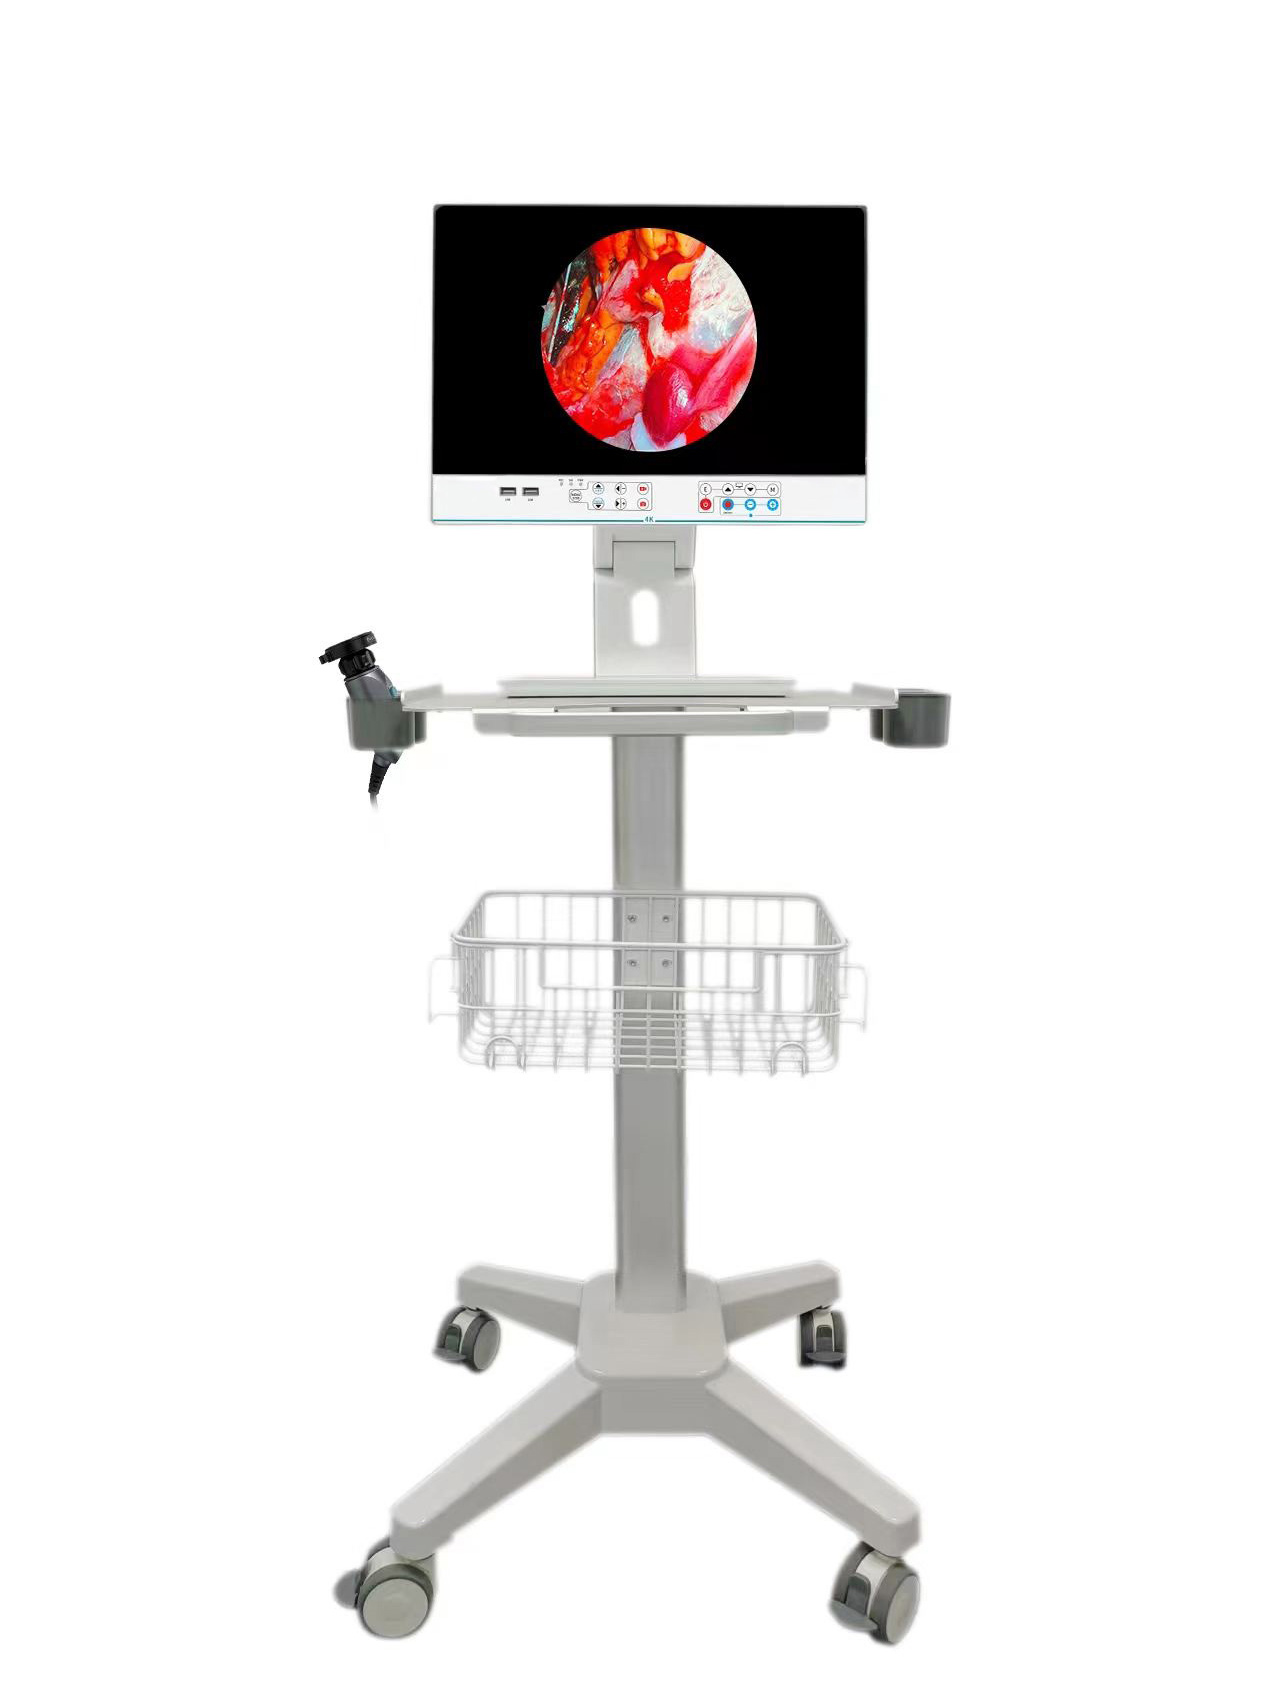 4K Ultra HD Medical Grade Monitor Endoscope Camera With Optic Fiber Light Source For Surgery